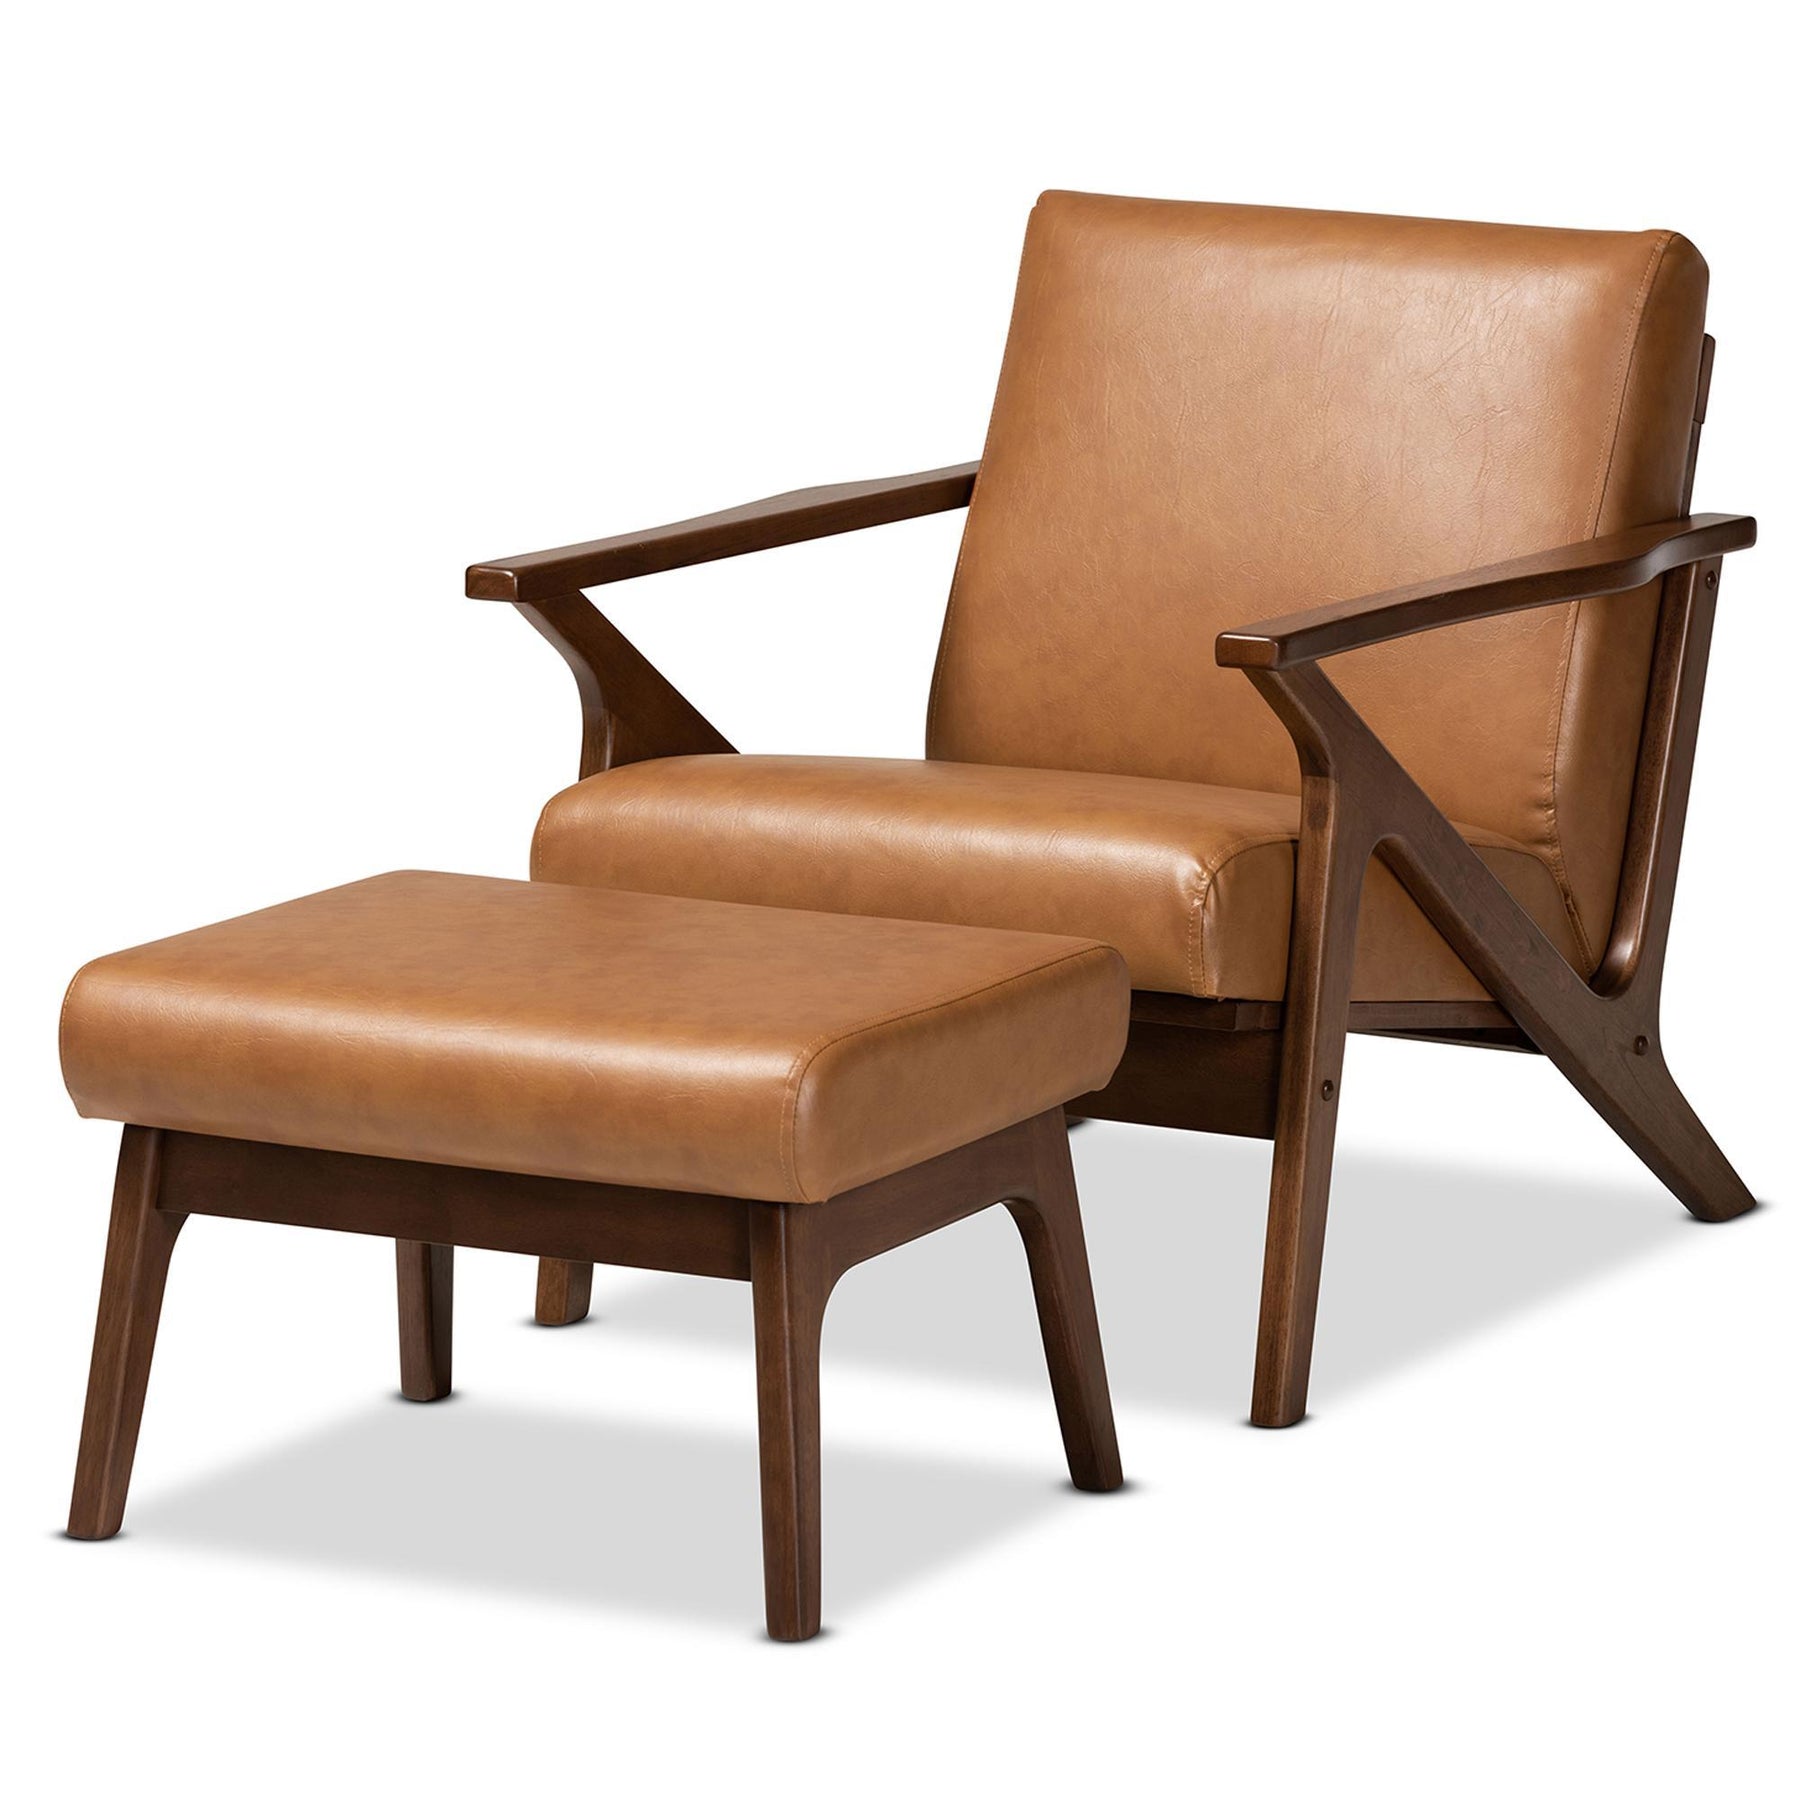 Baxton Studio Bianca Mid-Century Modern Walnut Brown Finished Wood And Tan Faux Leather Effect 2-Piece Lounge Chair And Ottoman Set - Bianca-Tan/Walnut Brown-2PC Set